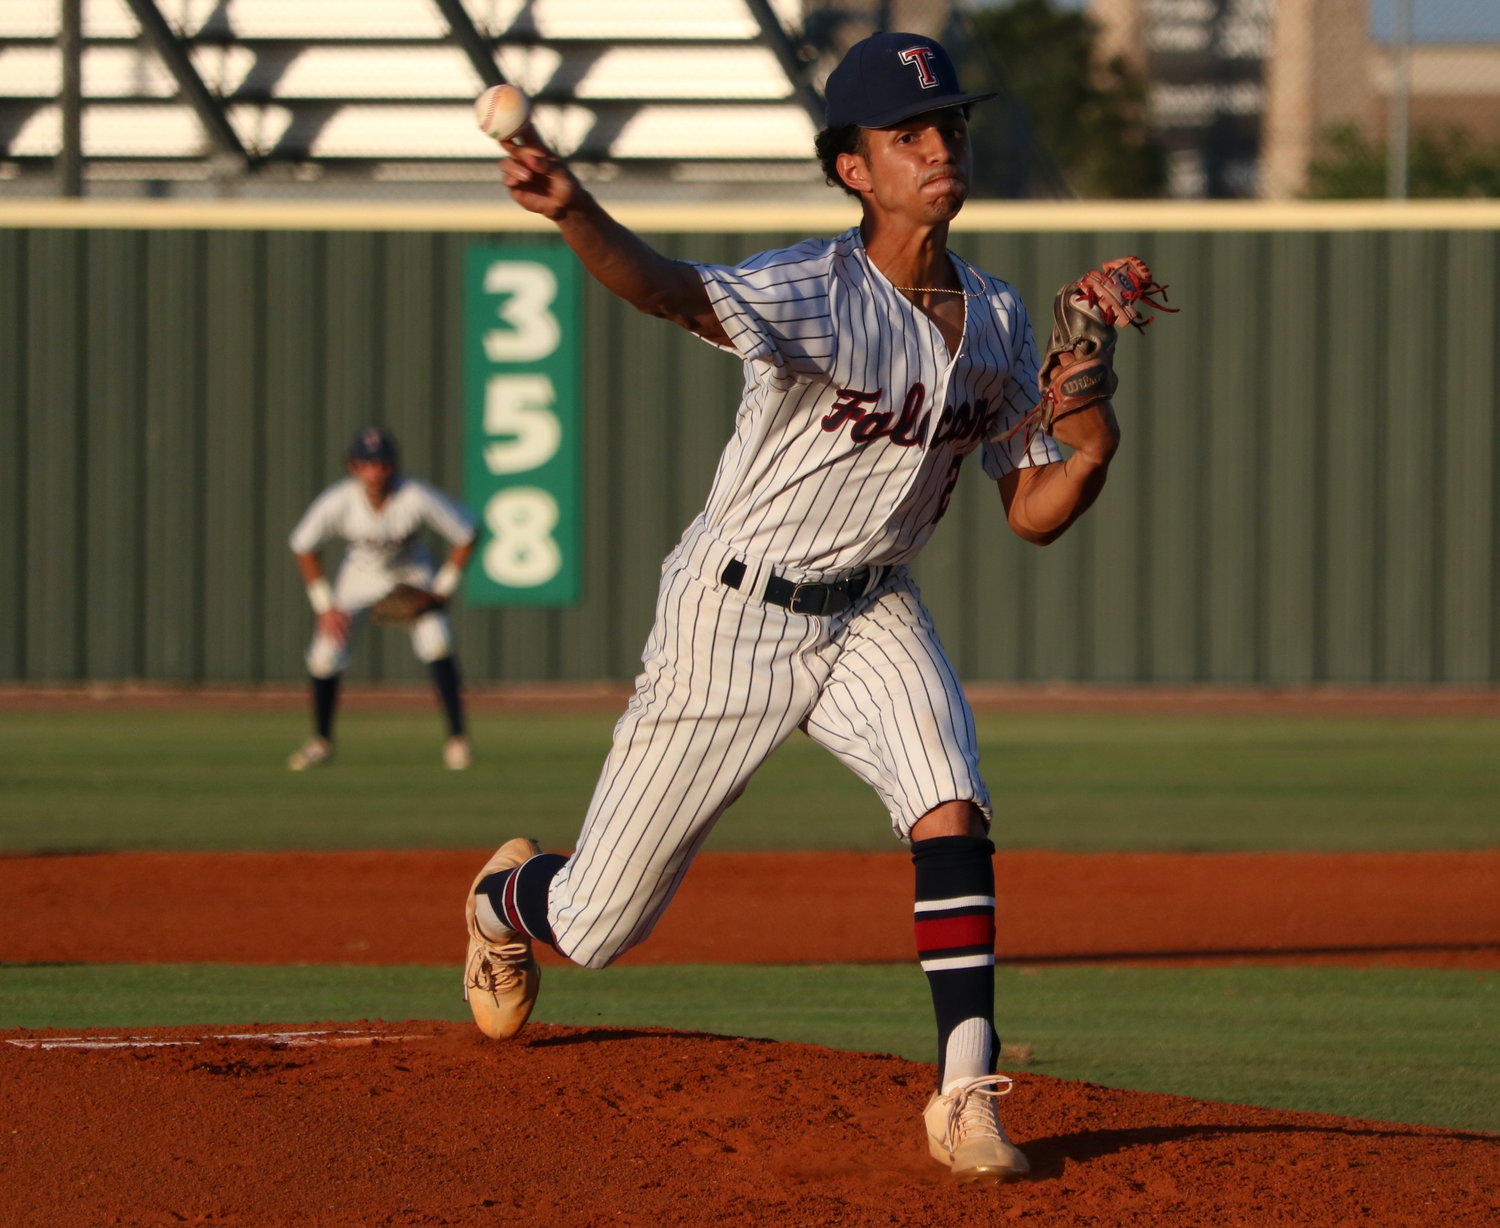 Trevor Esparza pitches during Thursday’s Class 6A area round game between Tompkins and Lamar at the Tompkins baseball field.